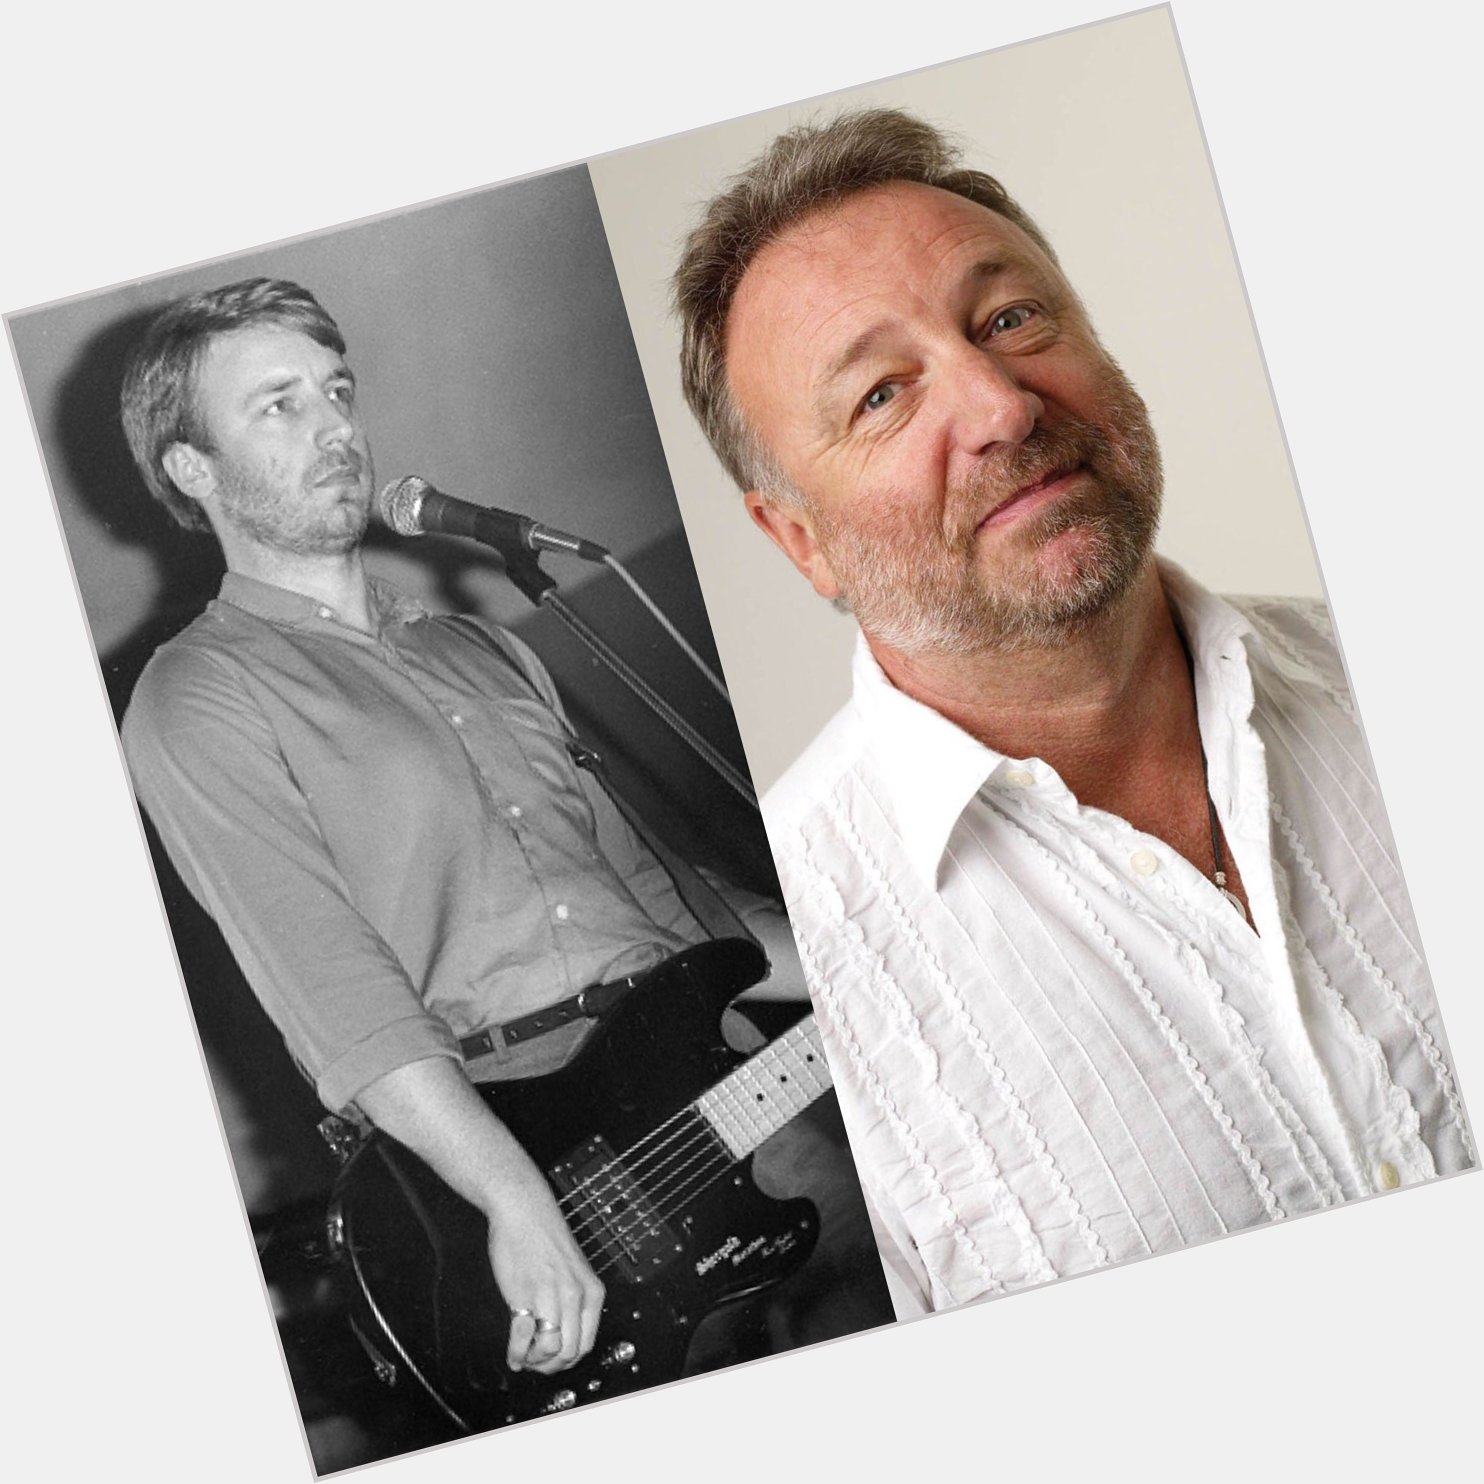 Happy 61st Birthday to Peter Hook, bassist and co-founder of Joy Division and New Order!!   